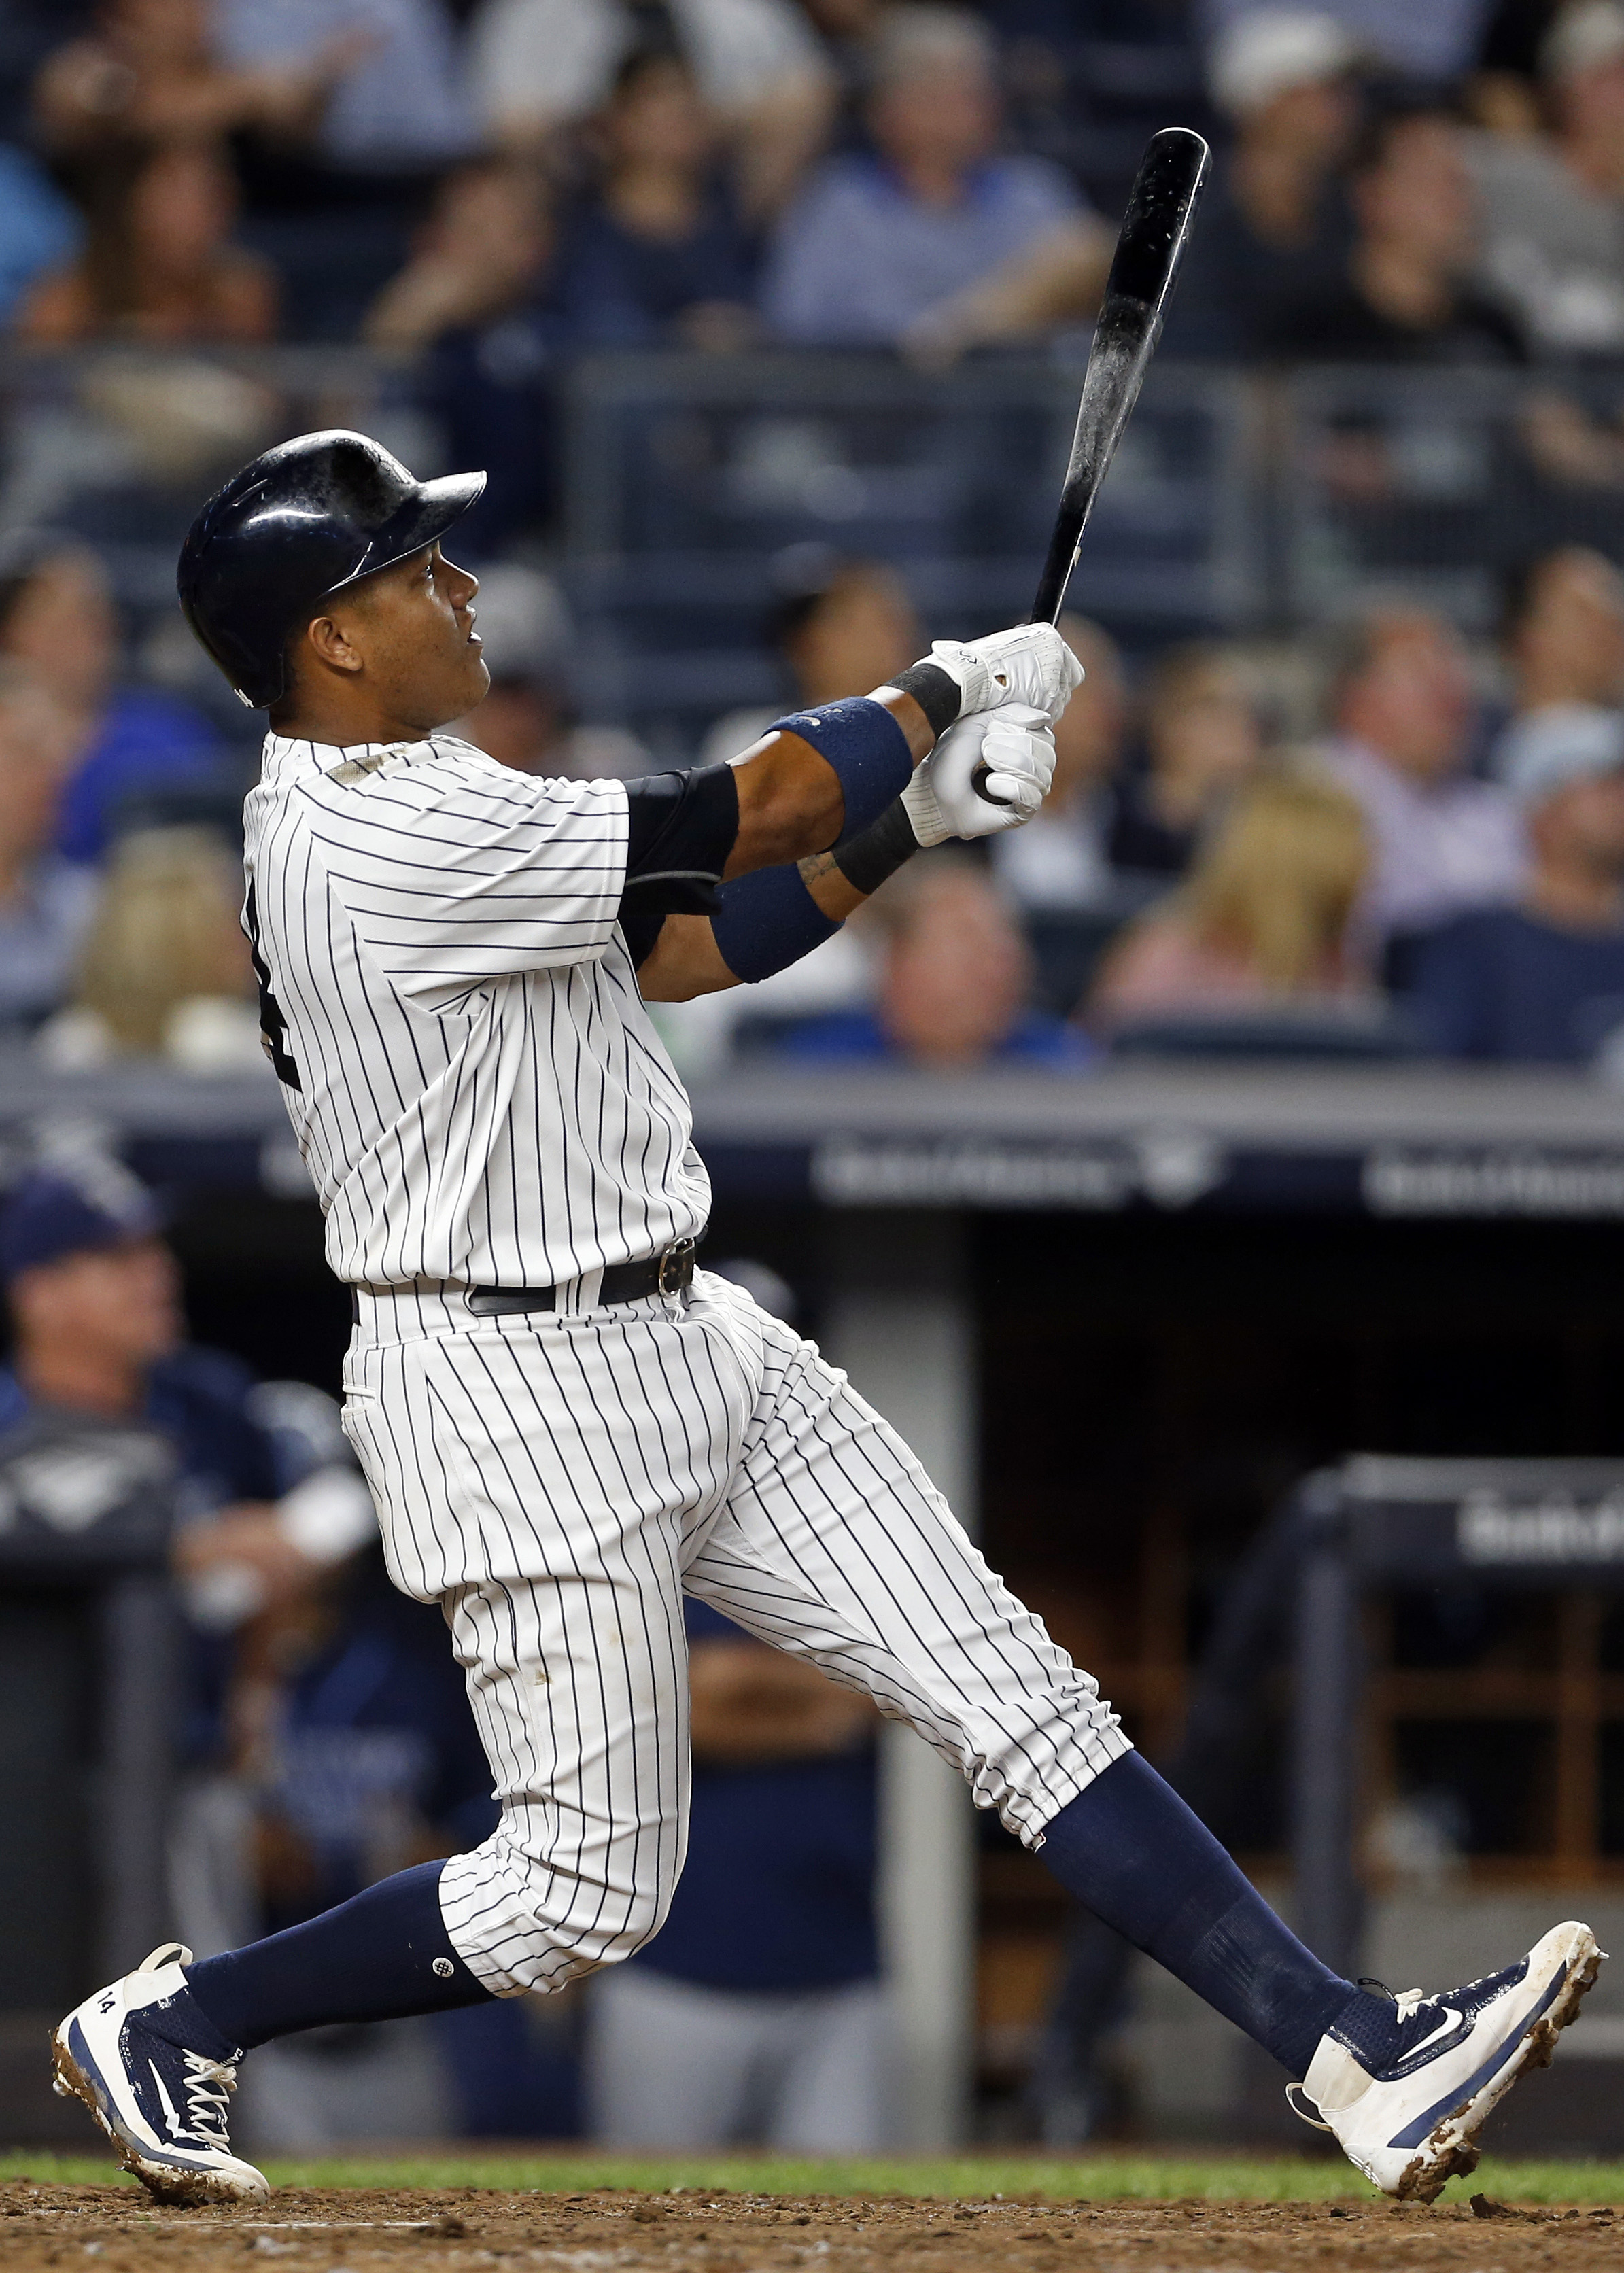 Reports: Cubs trade Starlin Castro to the Yankees